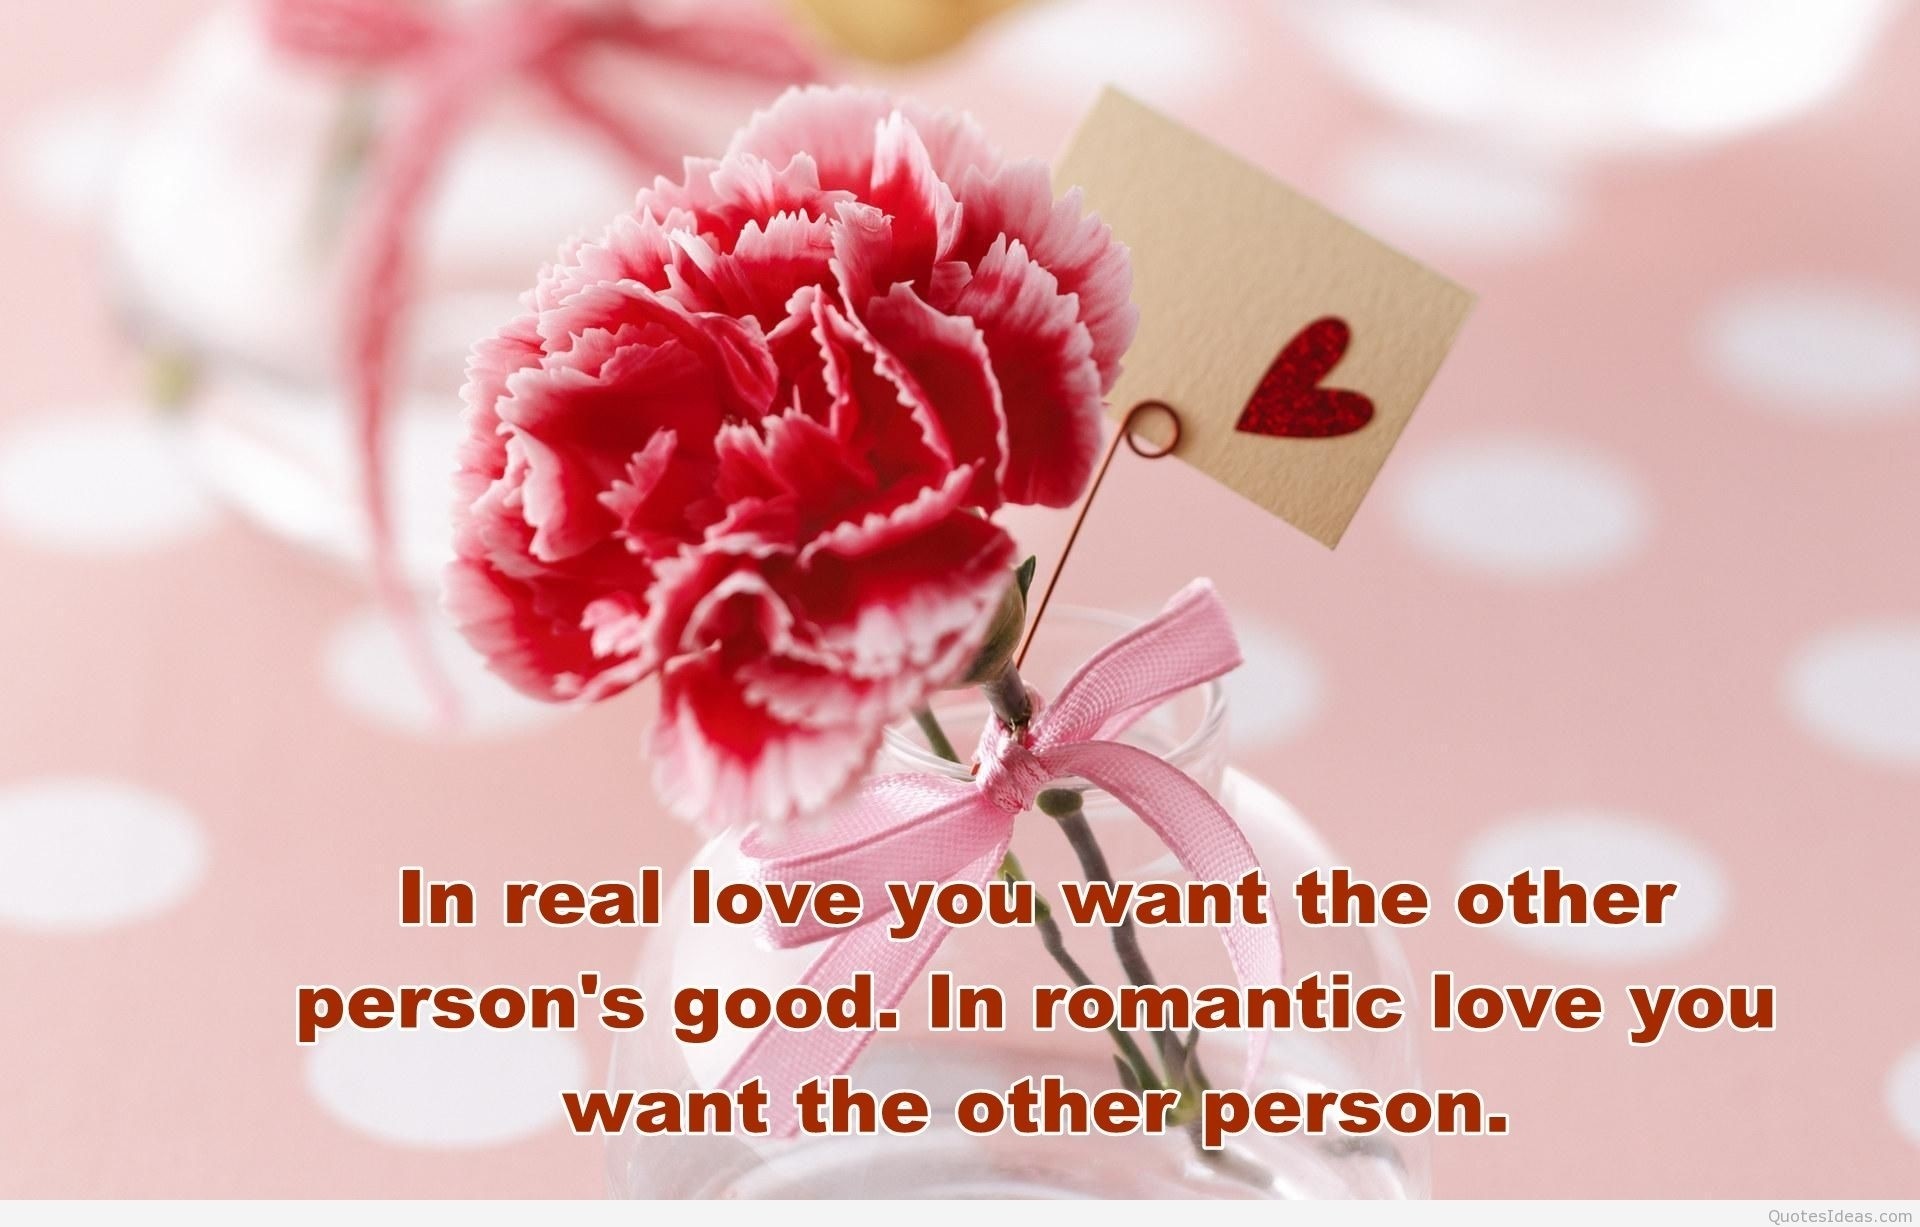 Romantic Love Quotation Wallpaper Love Romantic Quotes - Good Morning My Love Happy Tuesday , HD Wallpaper & Backgrounds